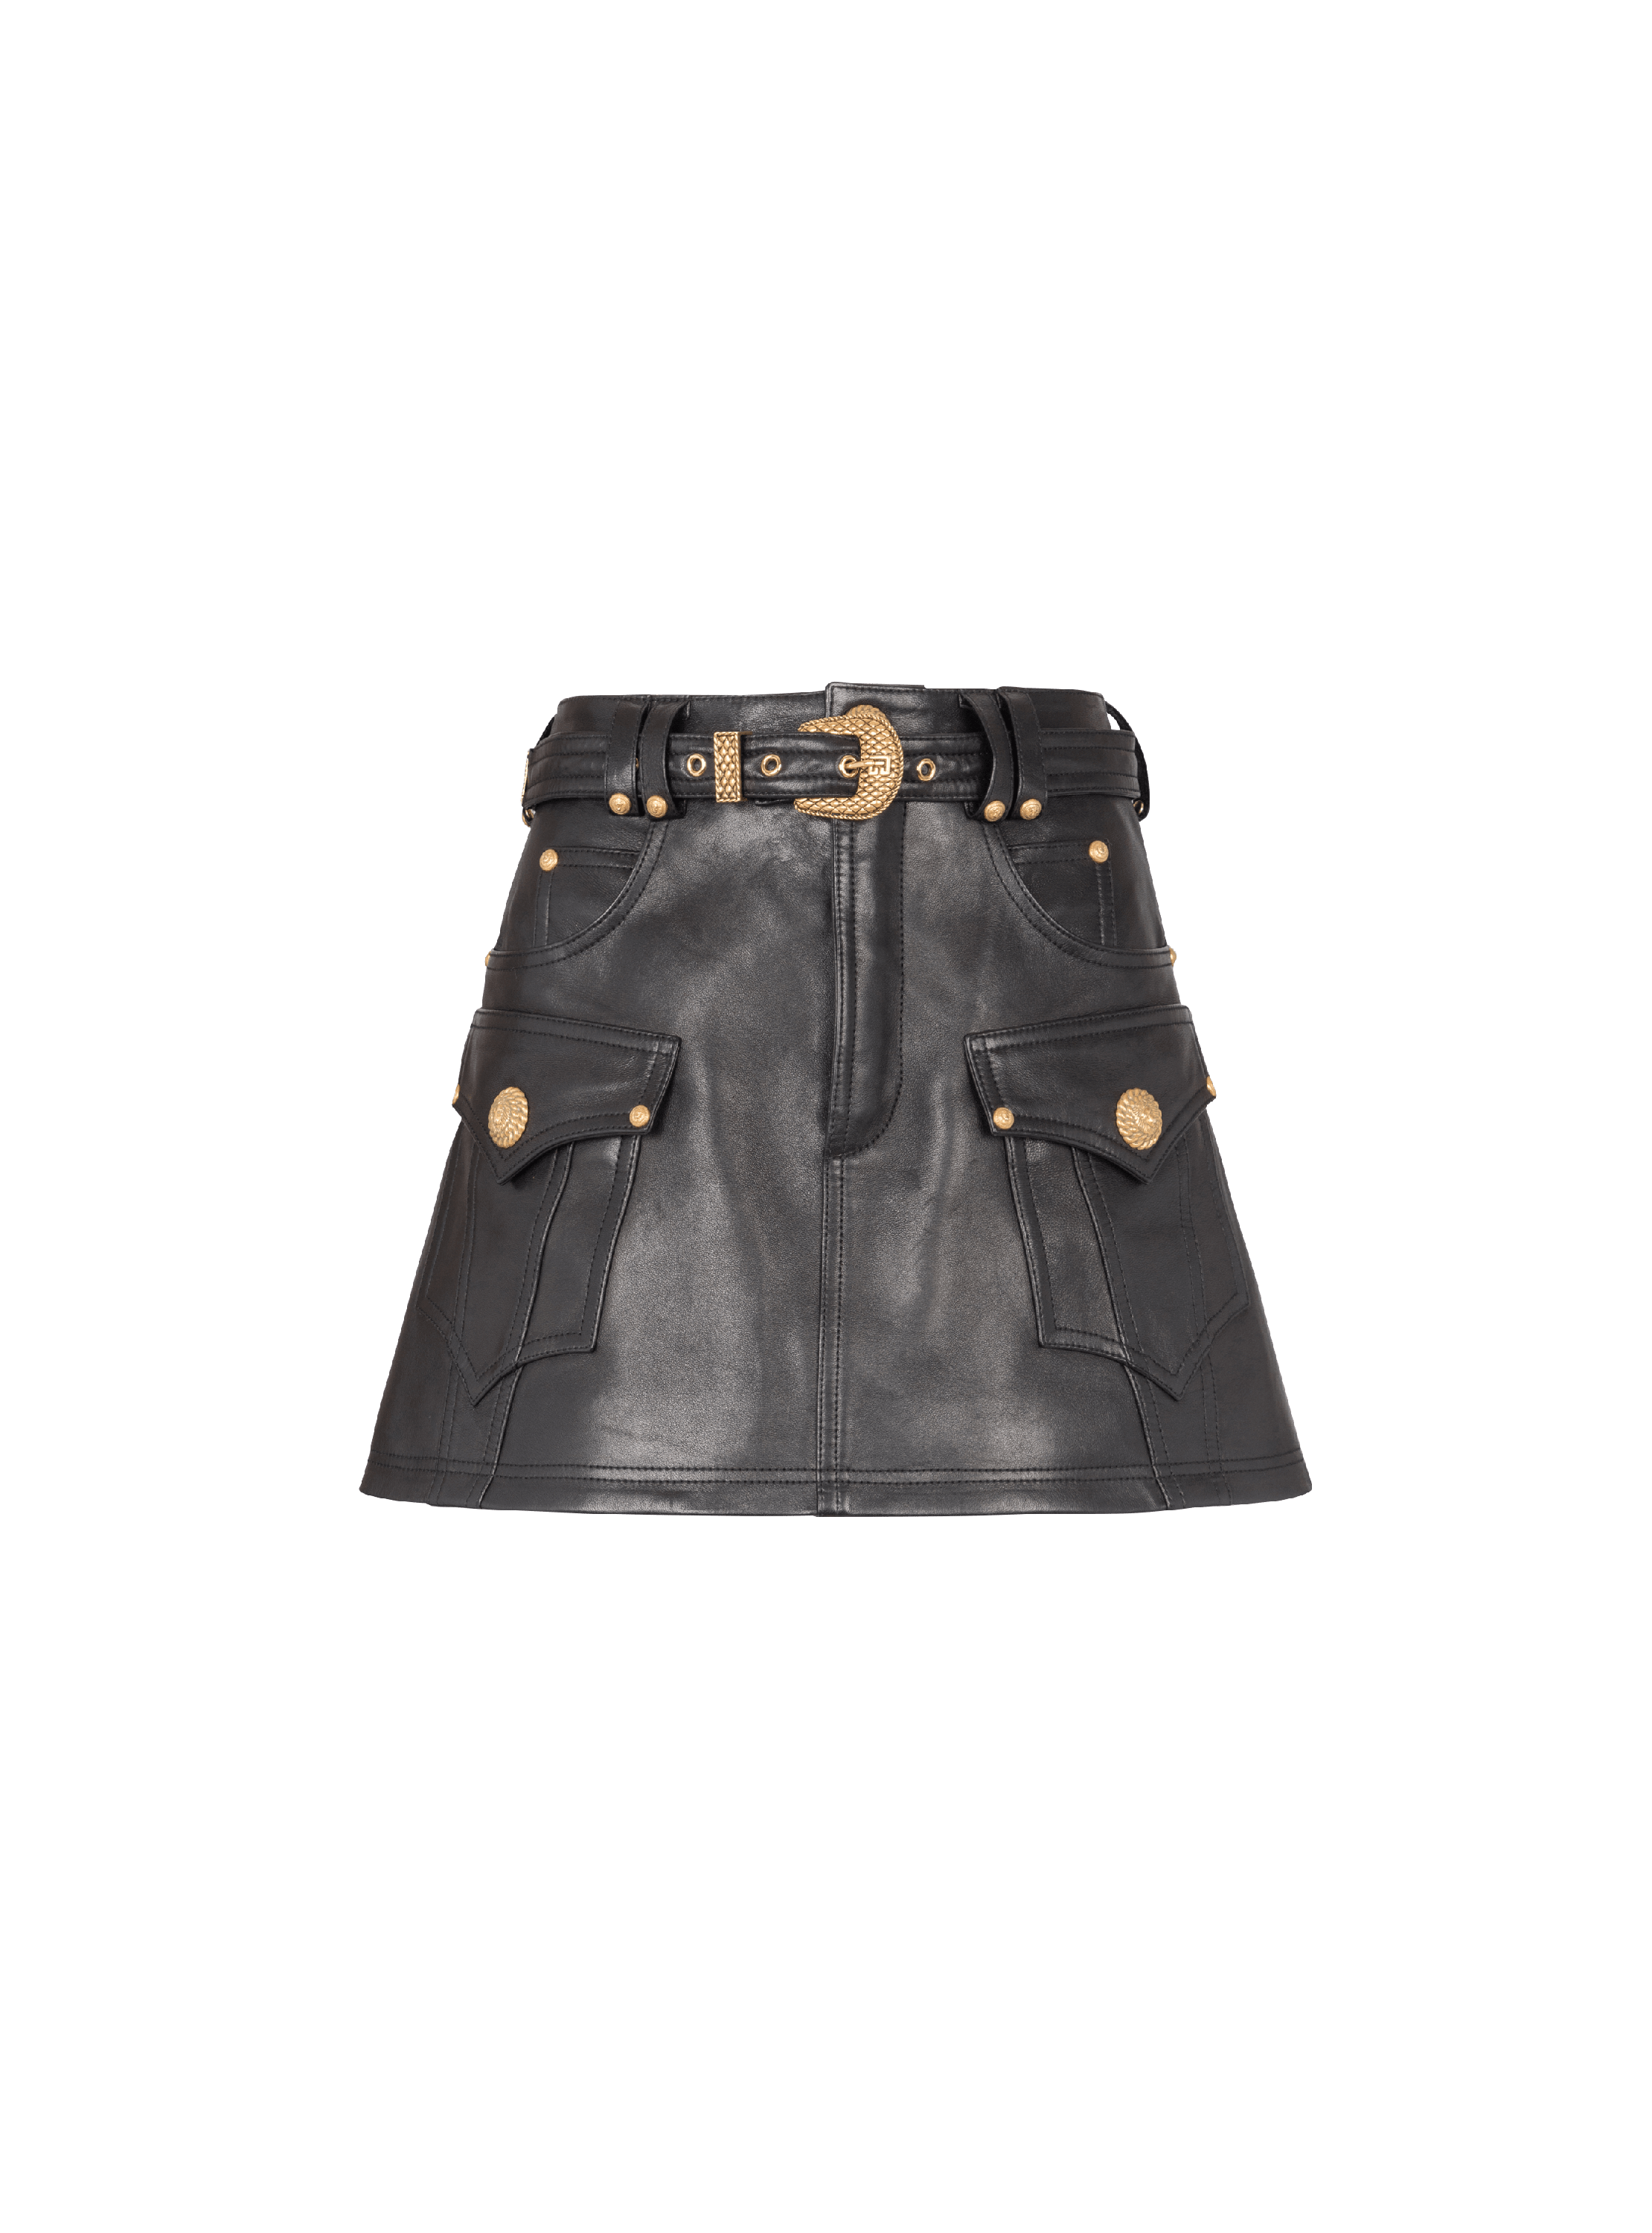 Western leather A-line skirt